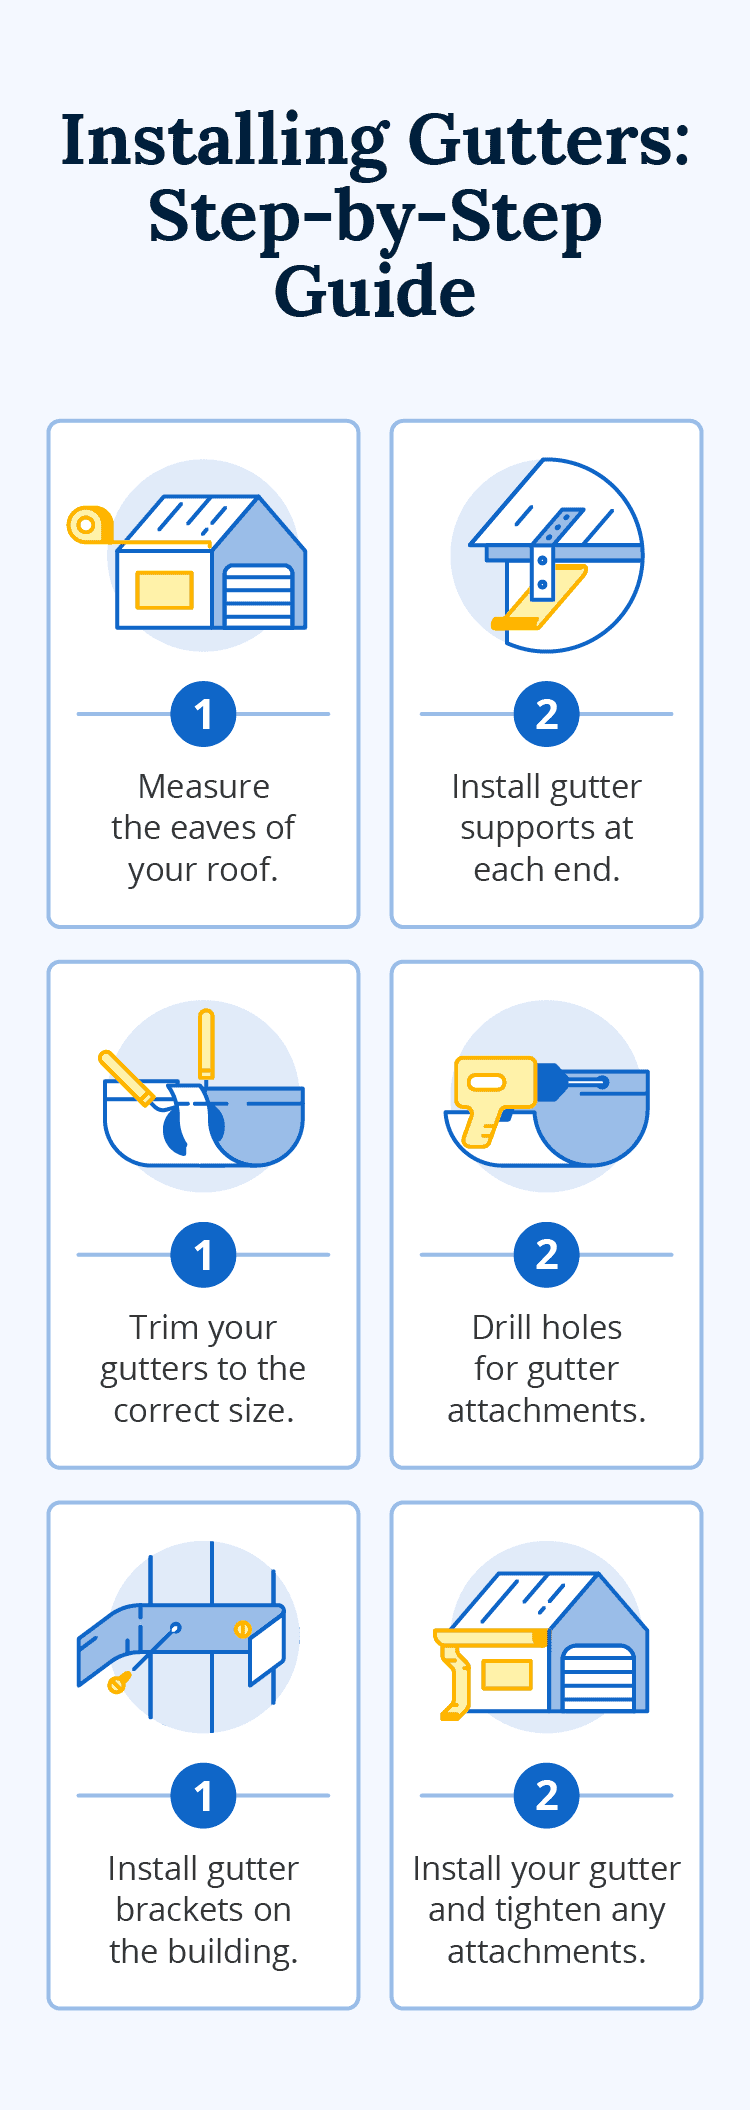 Image of a gutter with key benefits for you and your property.